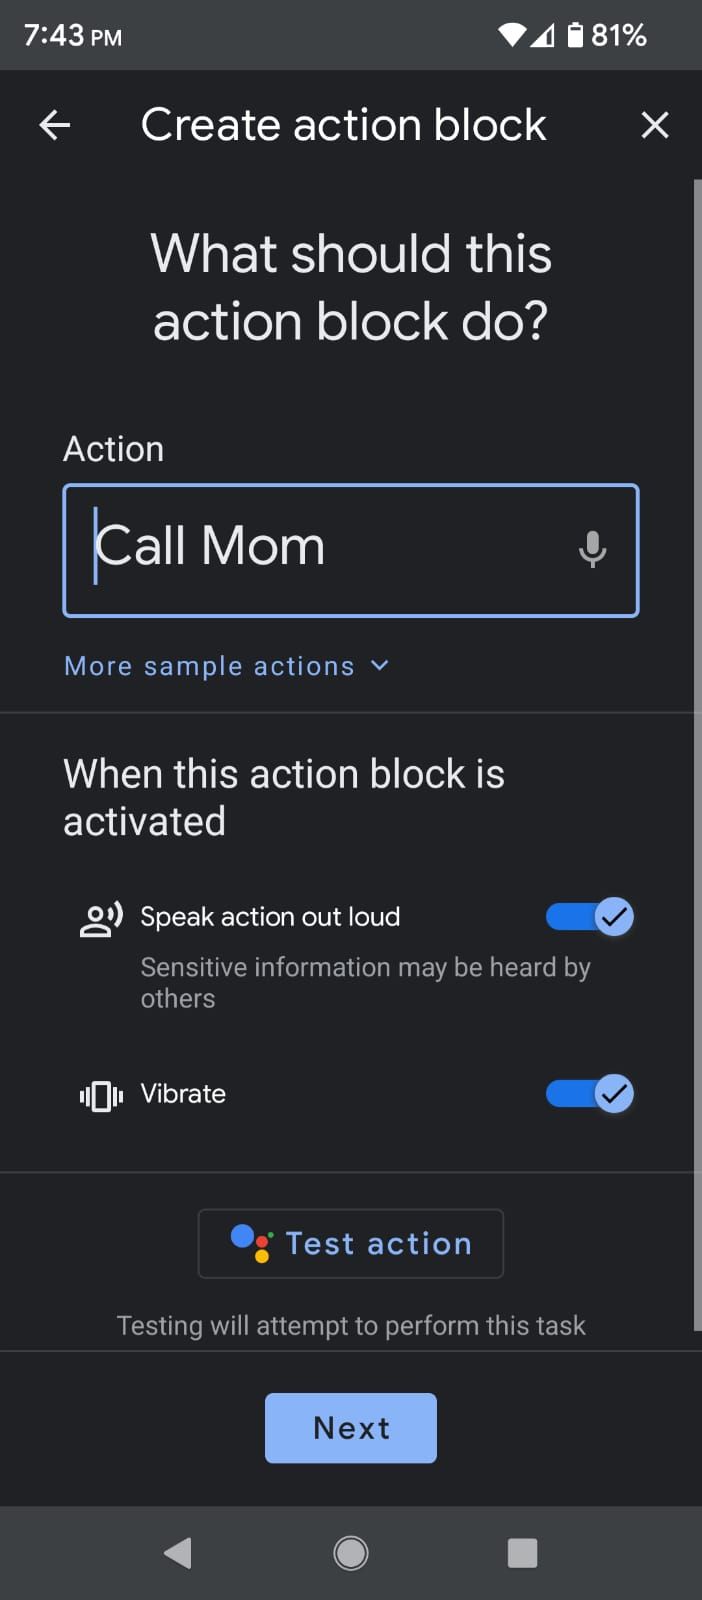 Creating an Action Block for Calling Mom